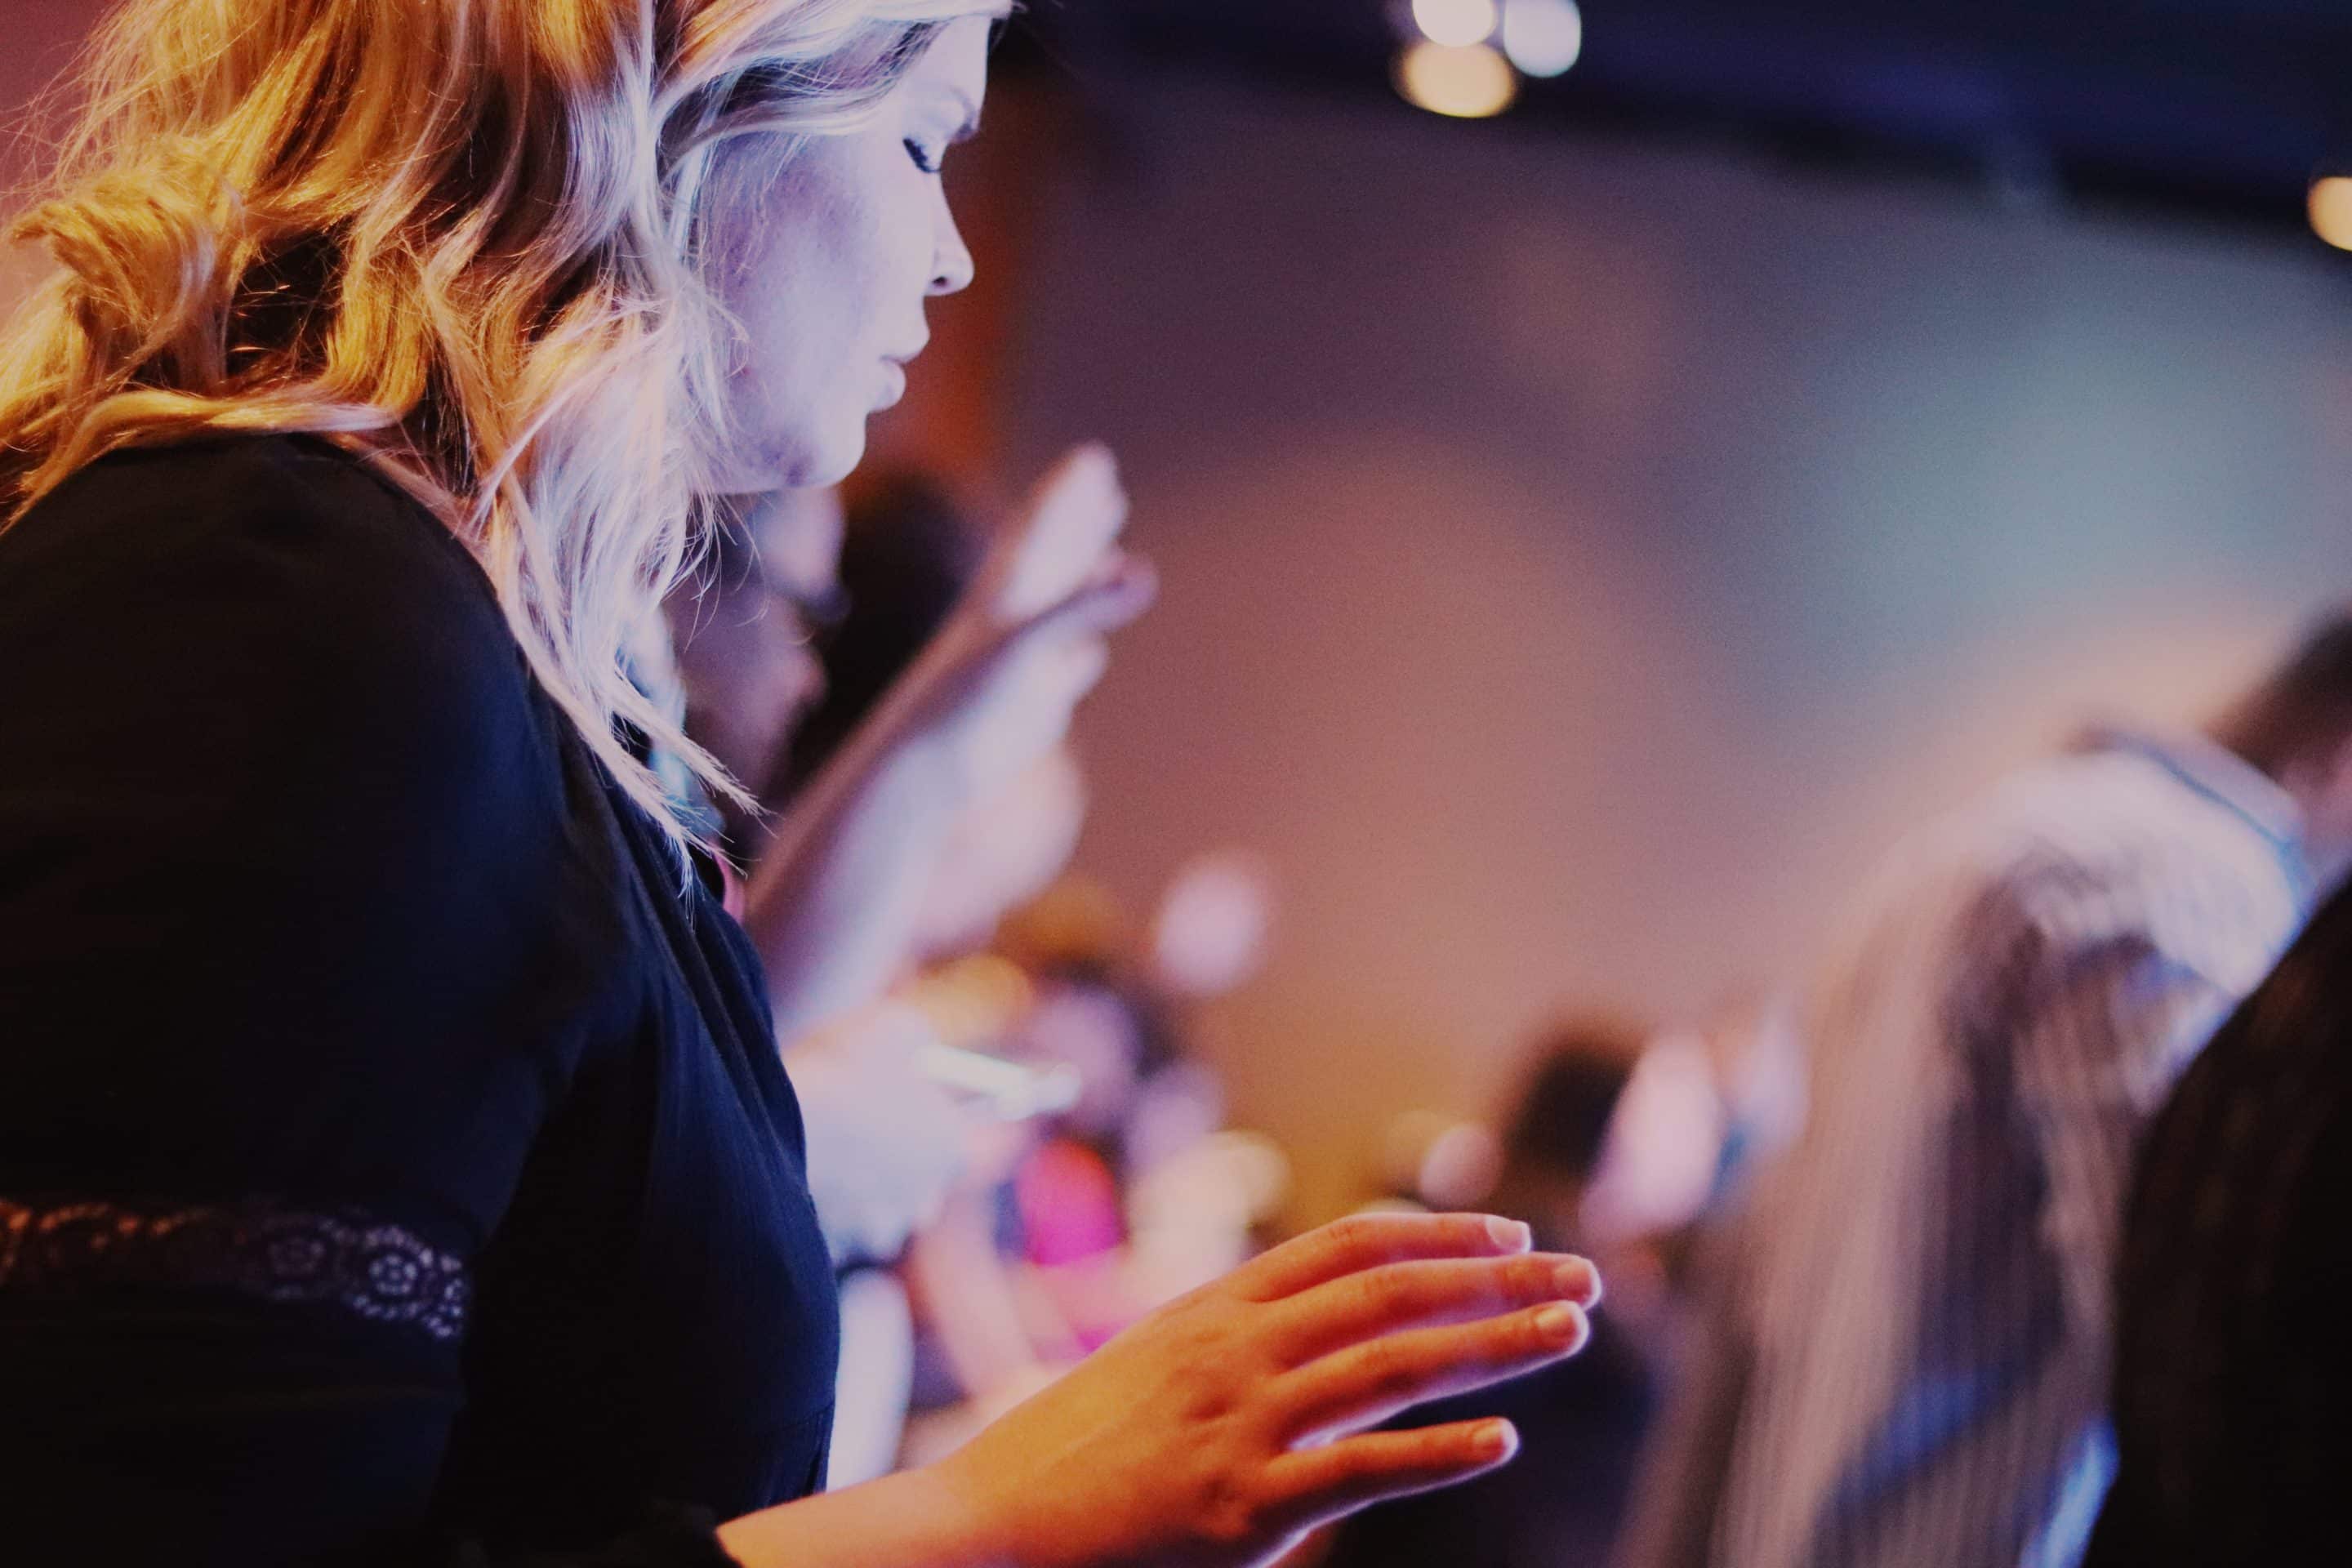 A woman worshipping Jesus and being saturated by the presence of God